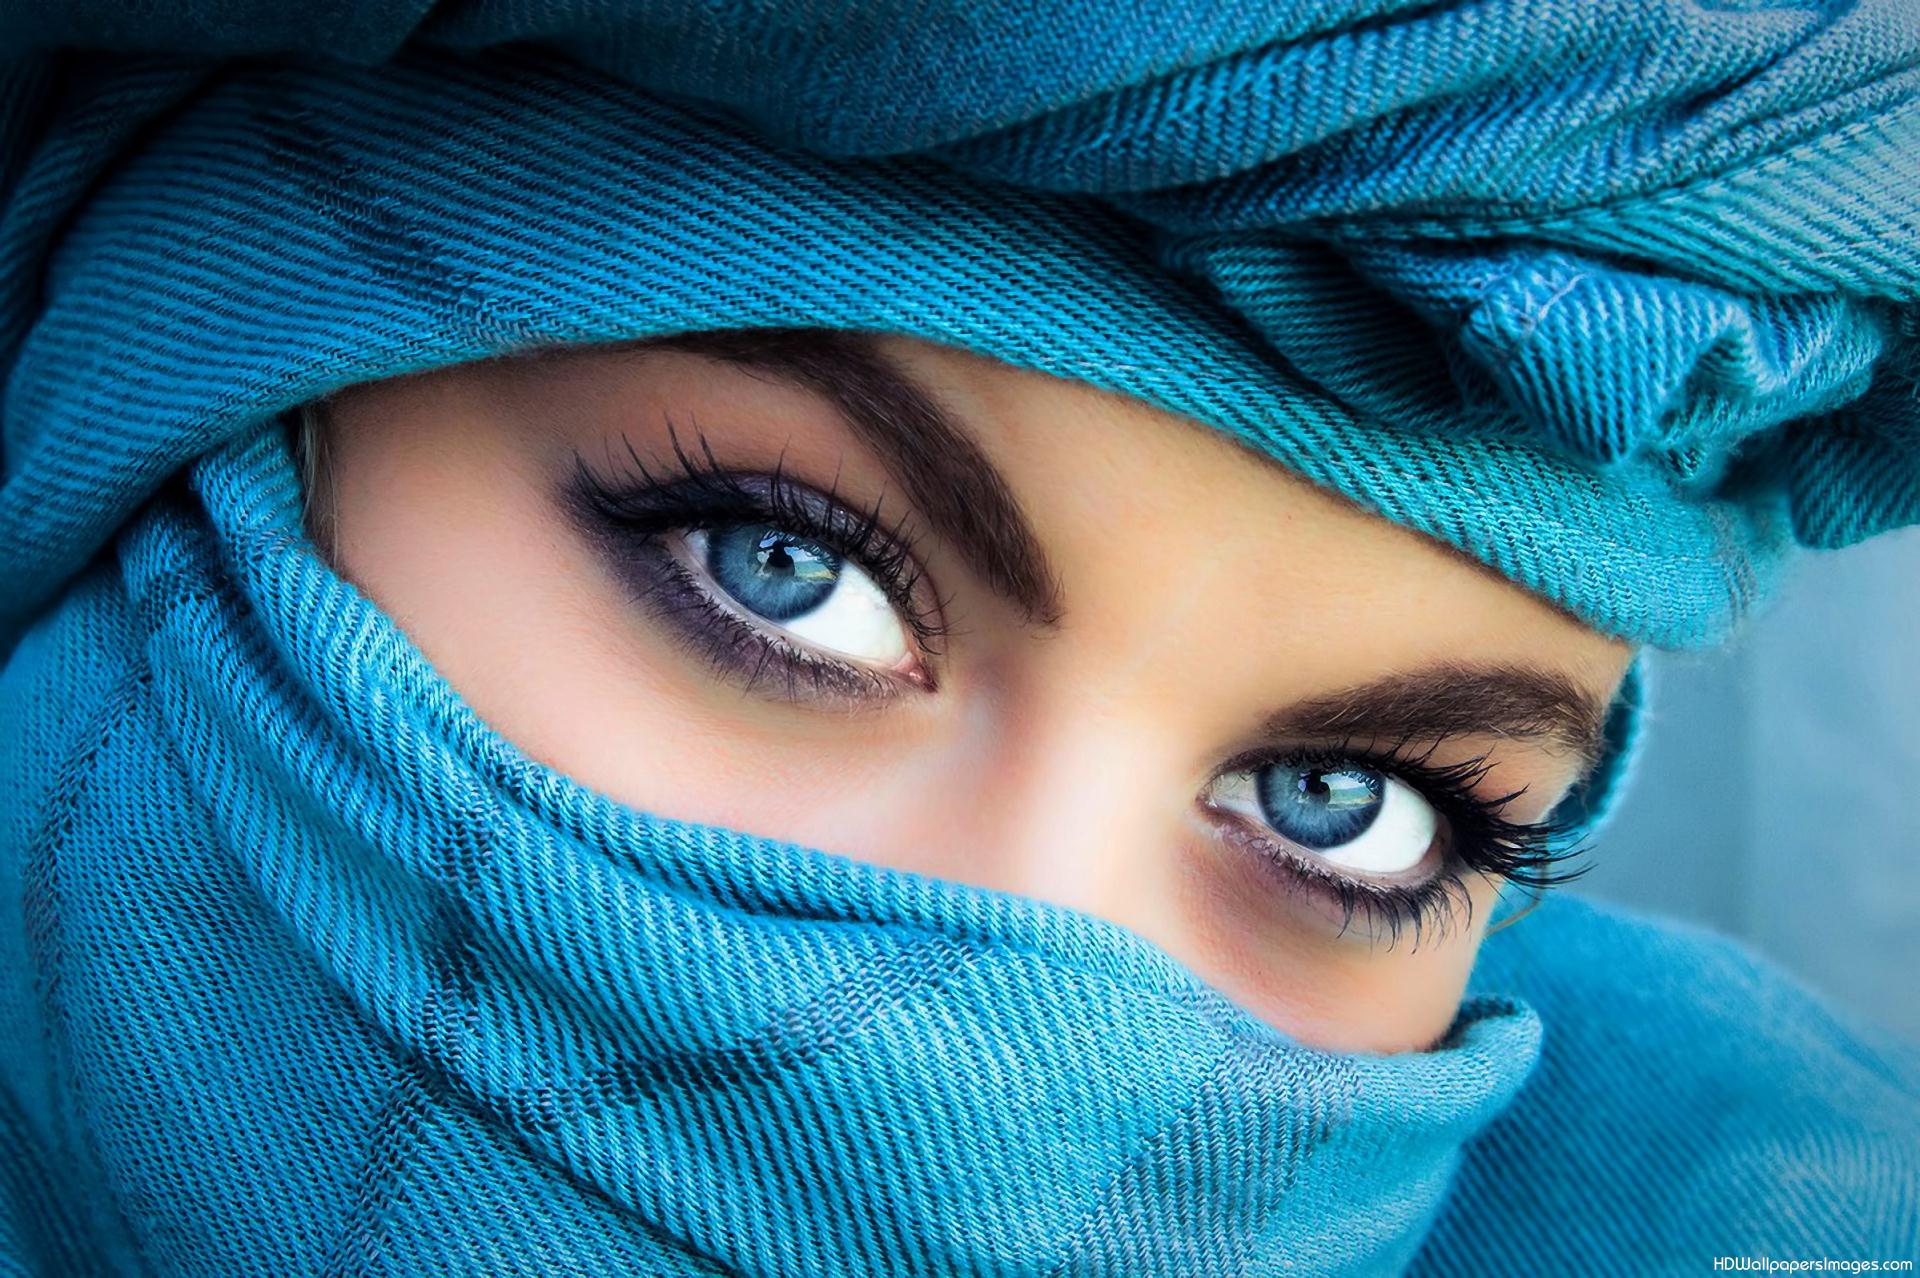 Most Beautiful Eyes HQ Wallpapers | World's Greatest Art Site